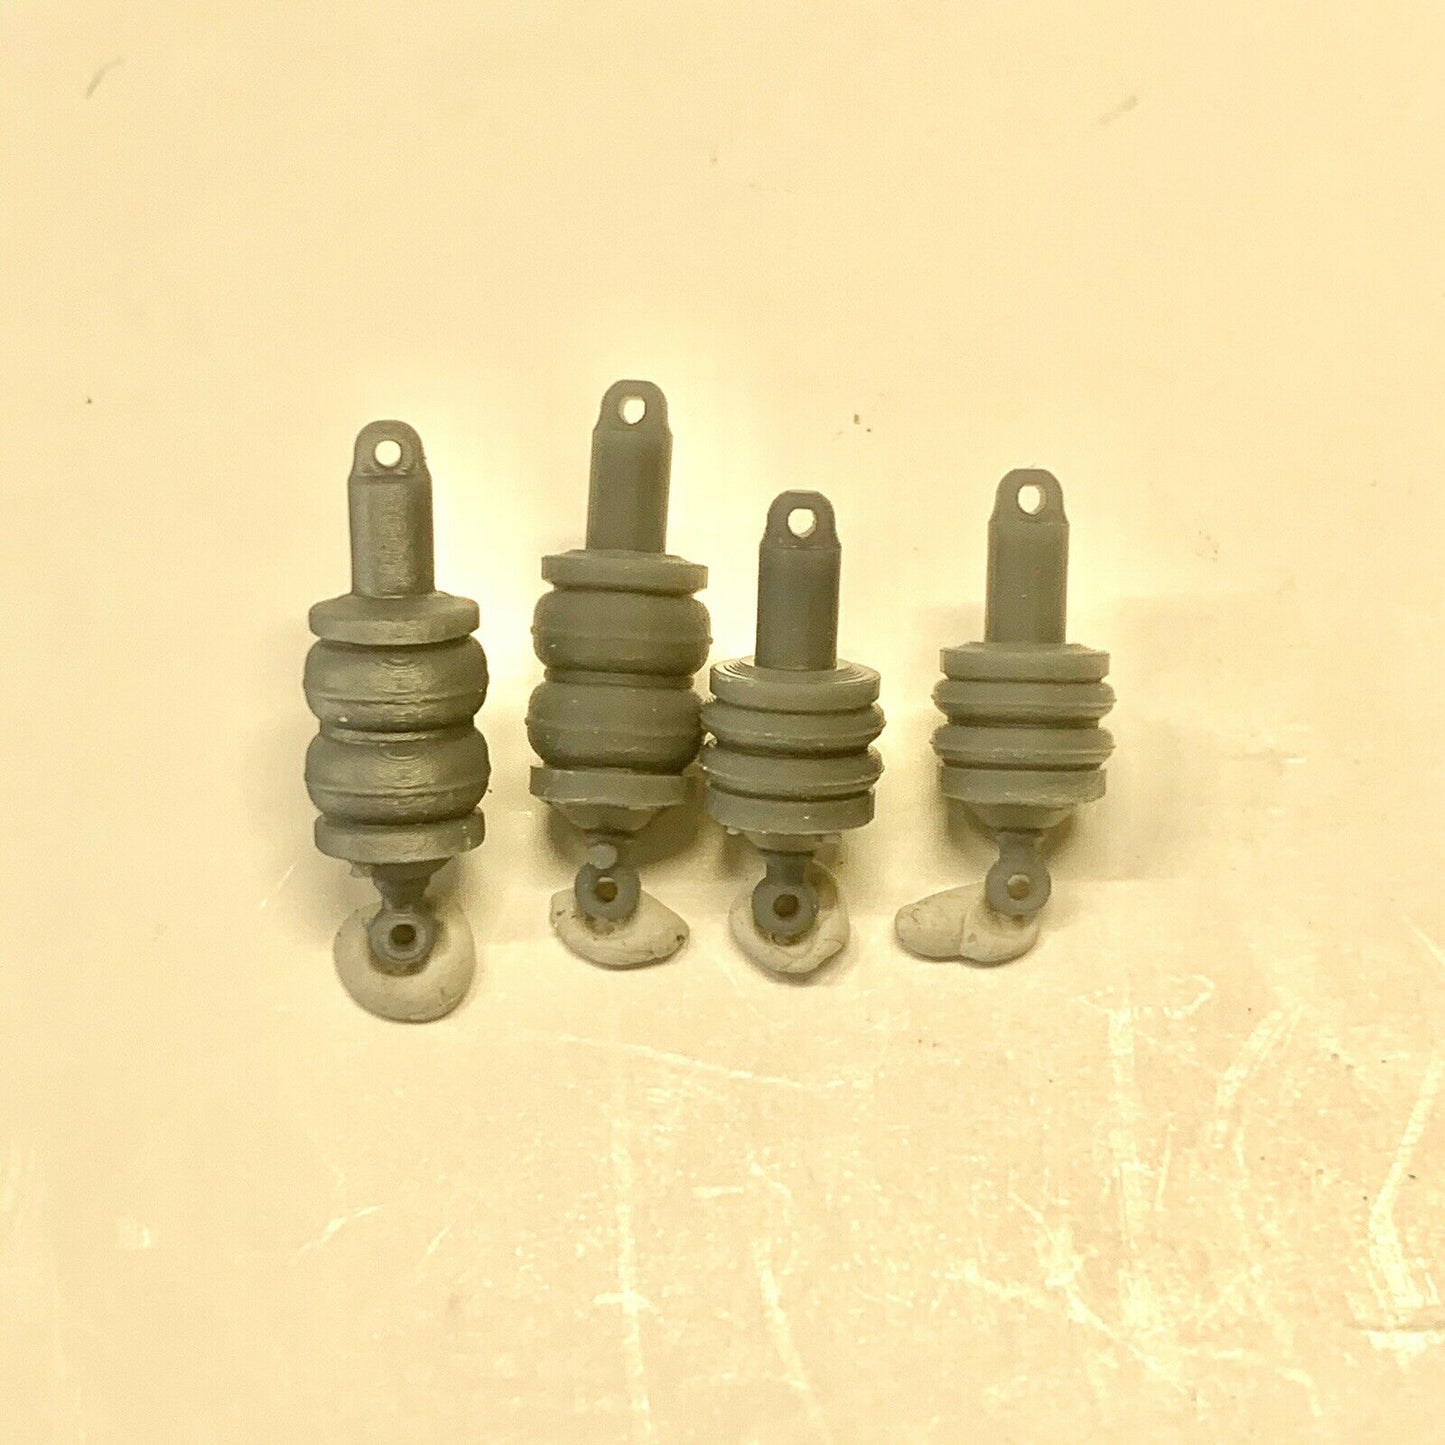 Set of Airbags Air Bags Generic or with Struts 1/24 1/25